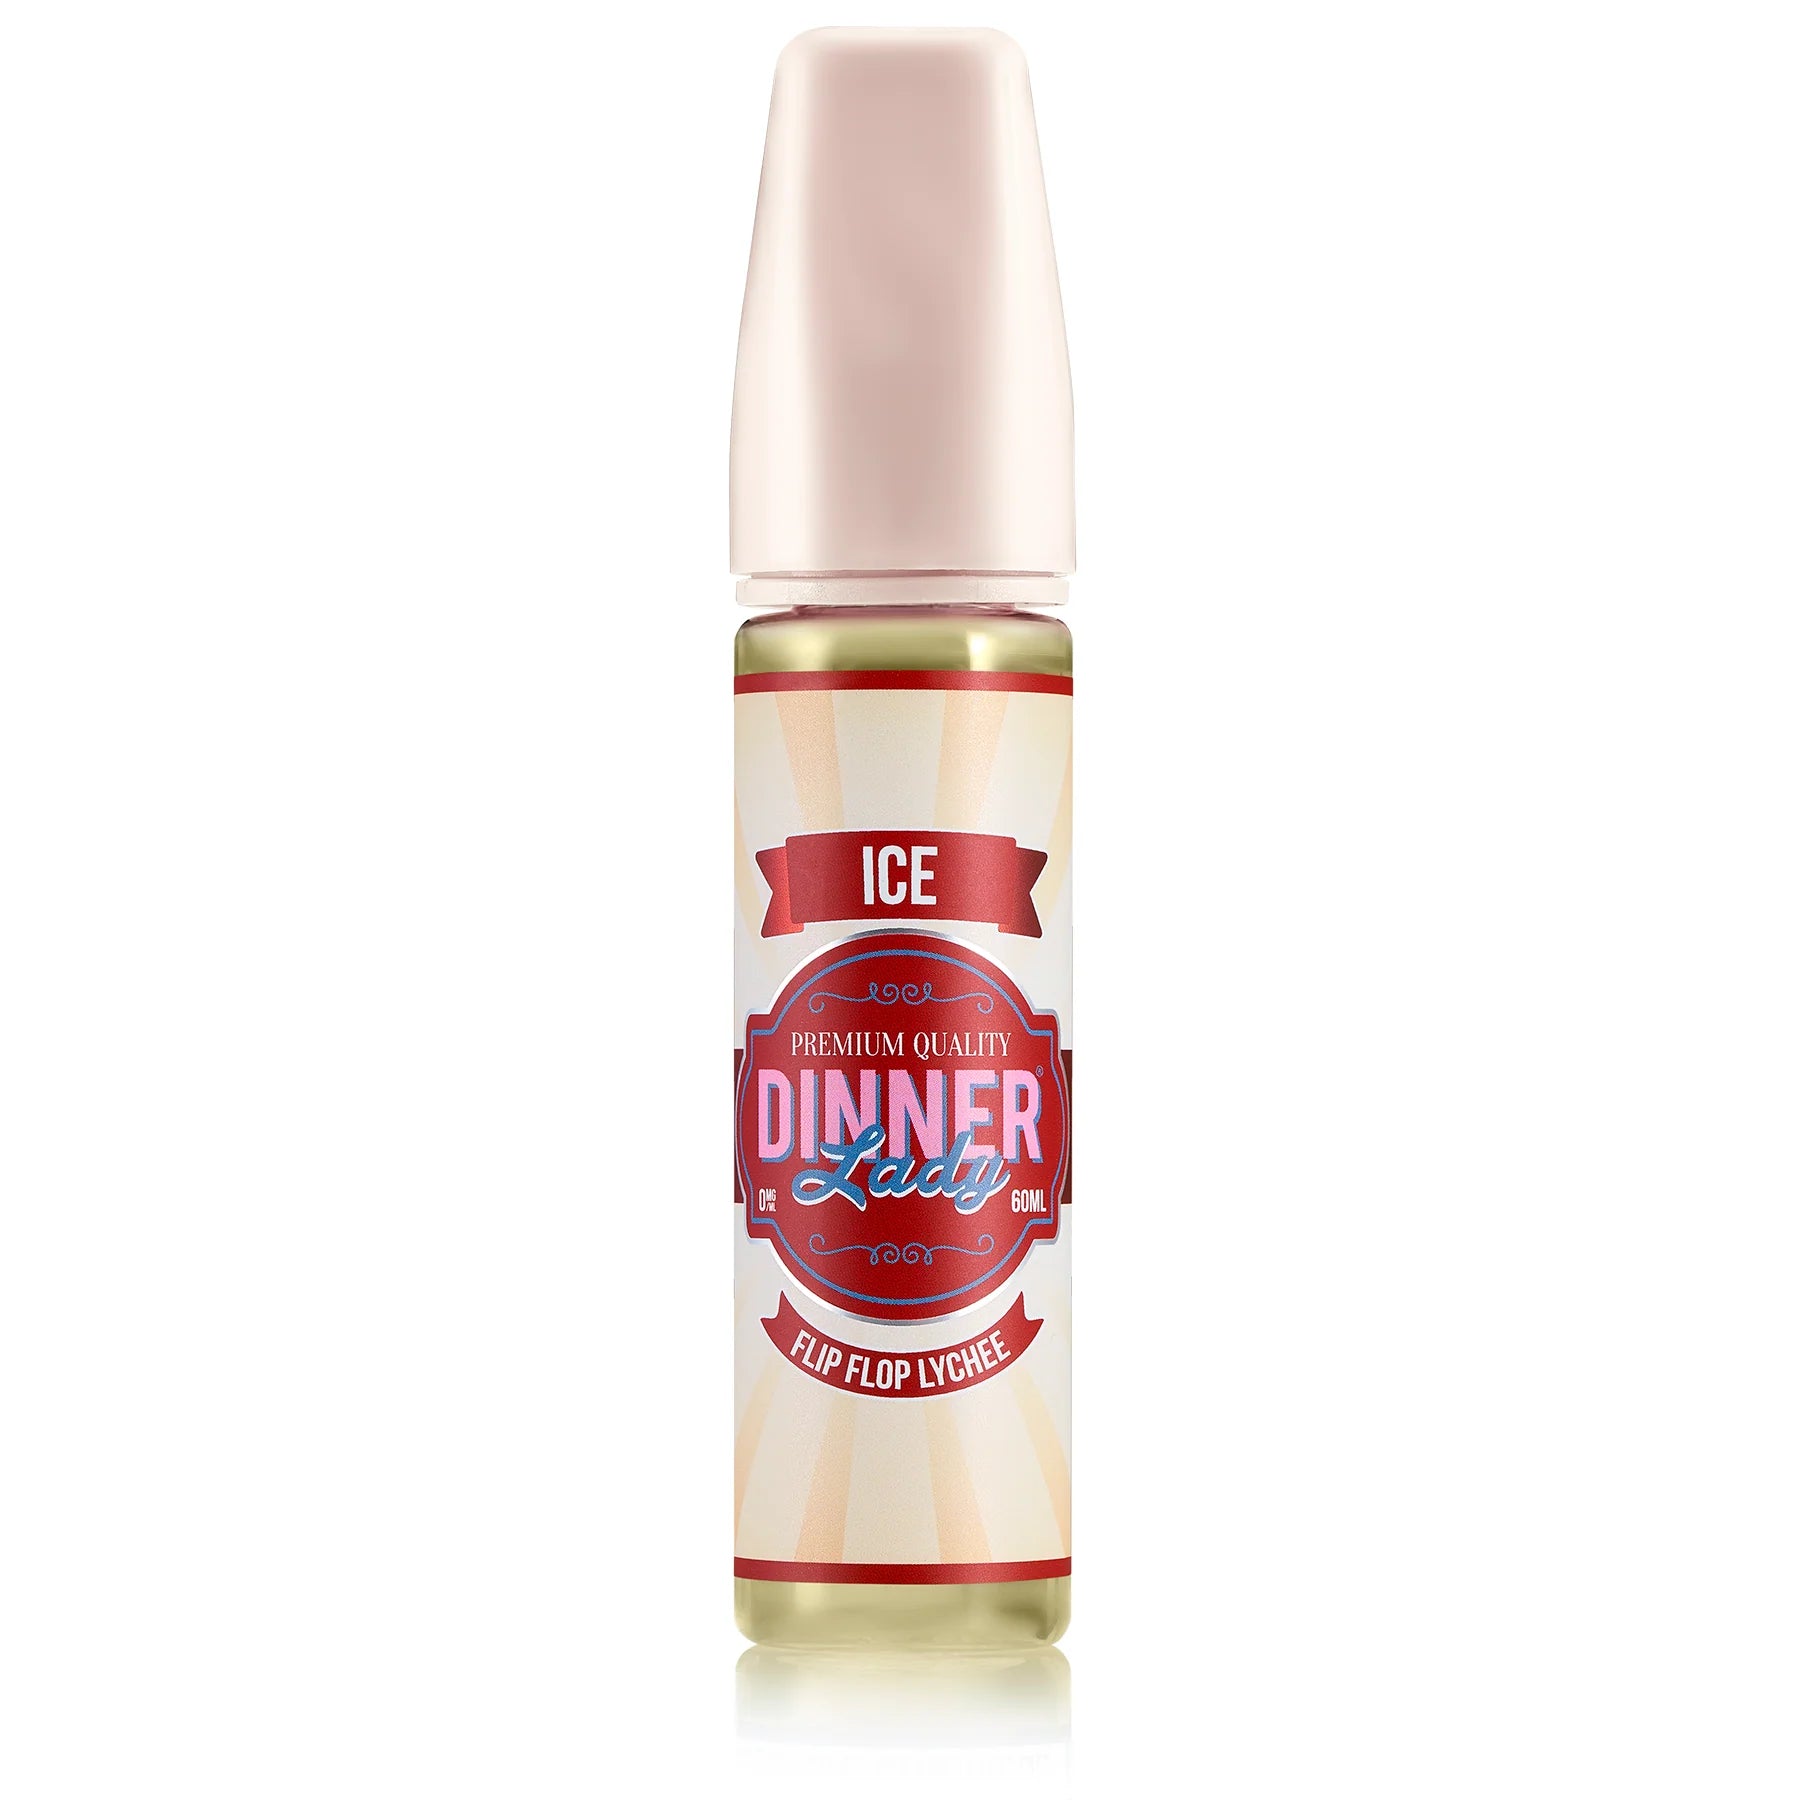 Buy Flip Flop Lychee Ice by Dinner Lady - Wick And Wire Co Melbourne Vape Shop, Victoria Australia